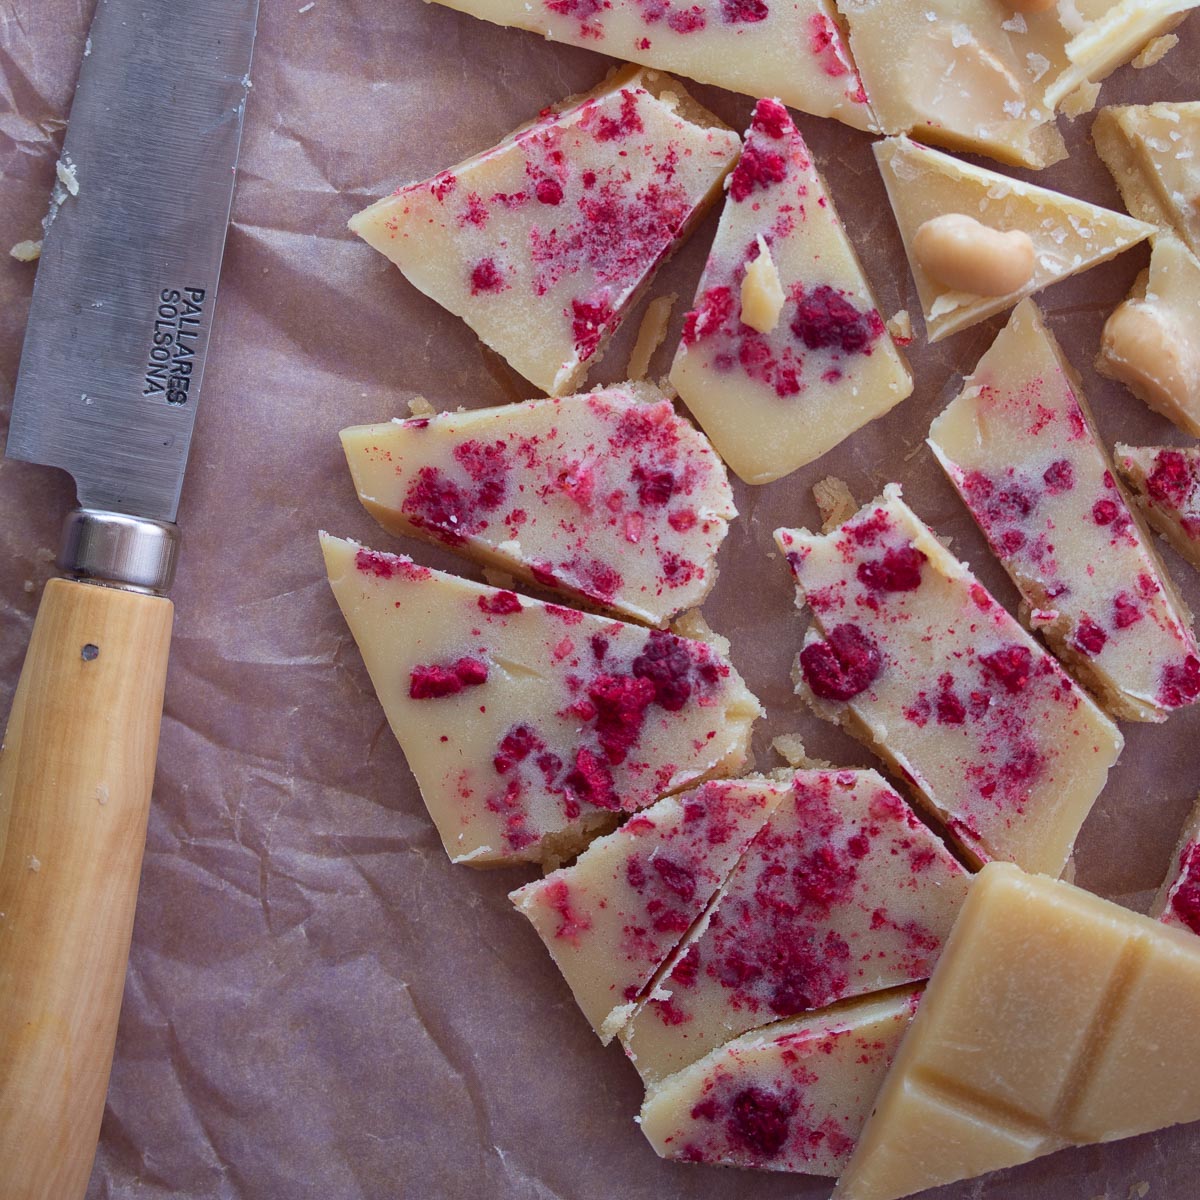 Vegan and Dairy Free white chocolate chopped in a close up with knife